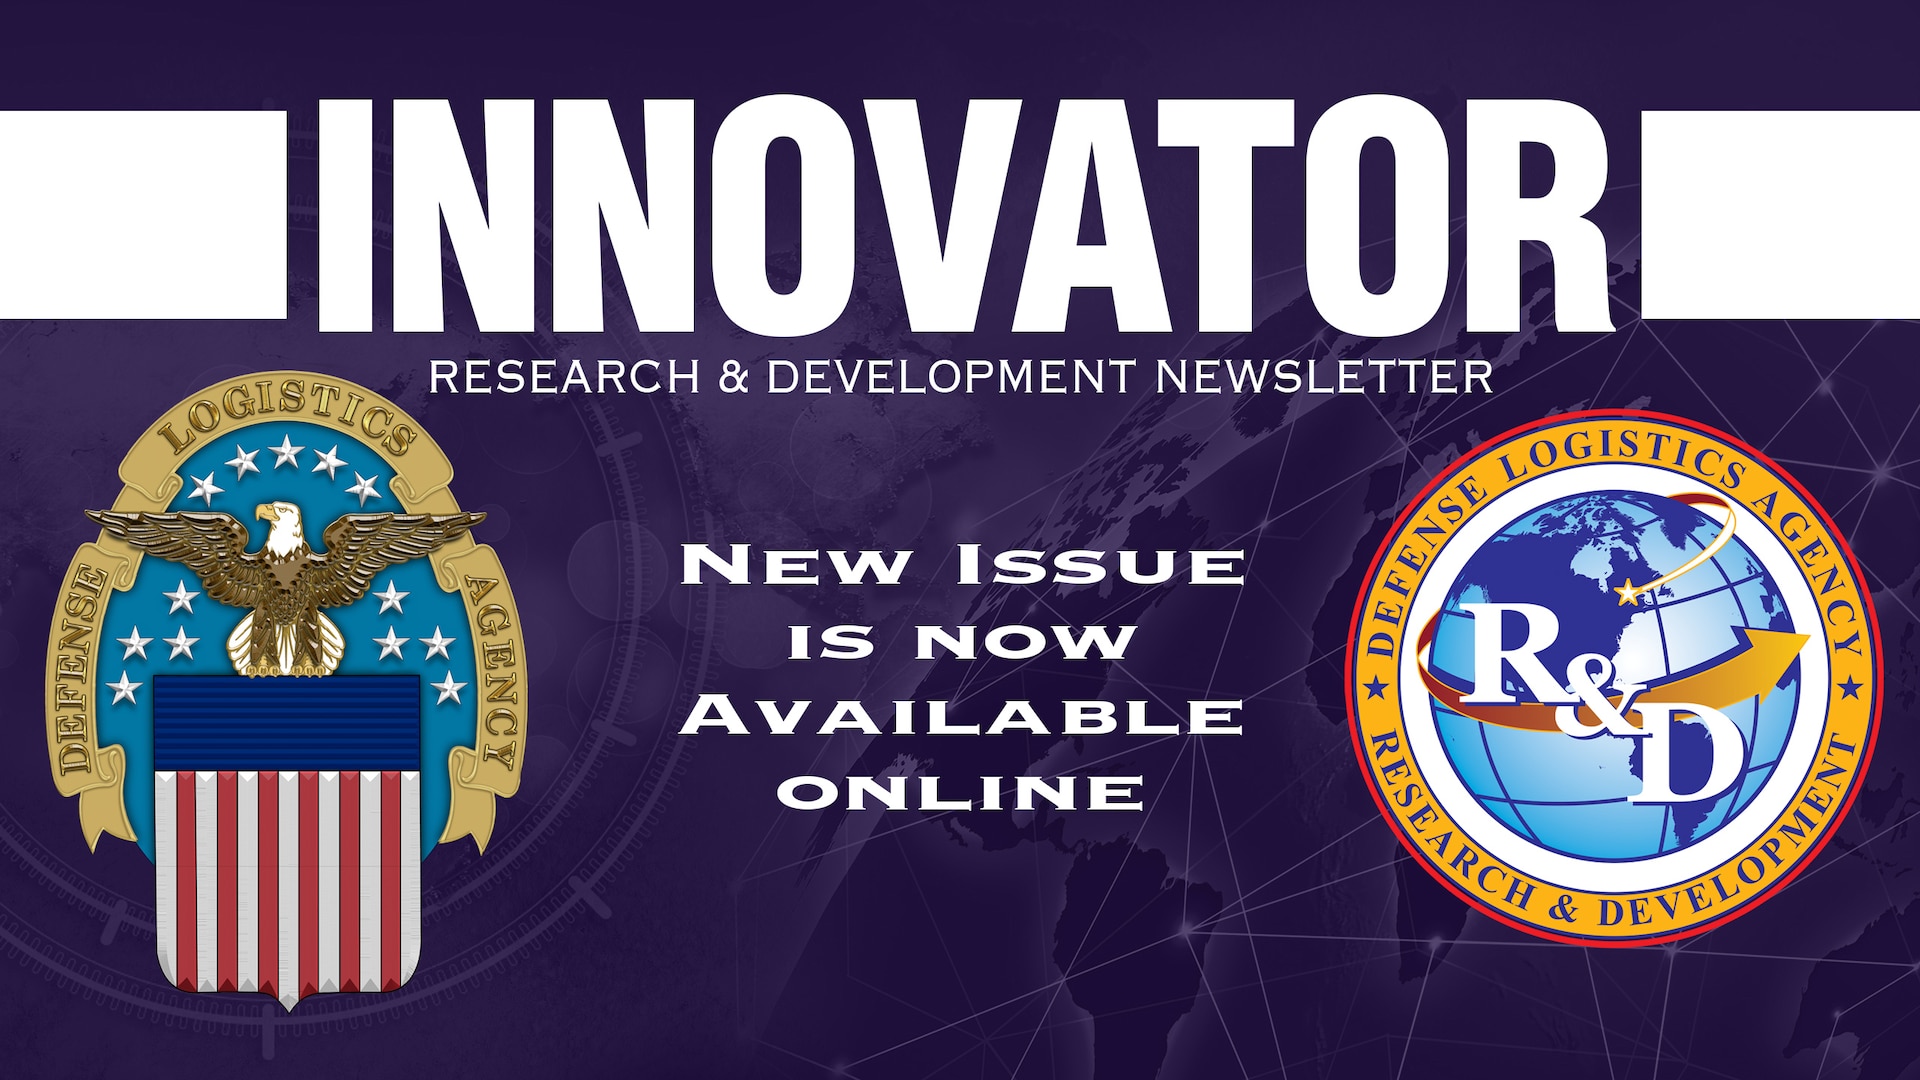 Graphic that says "New issue is now available online" with DLA logo of an eagle, stars and stripes plus the DLA R&D logo of a globe with "R&D" imprinted on top.